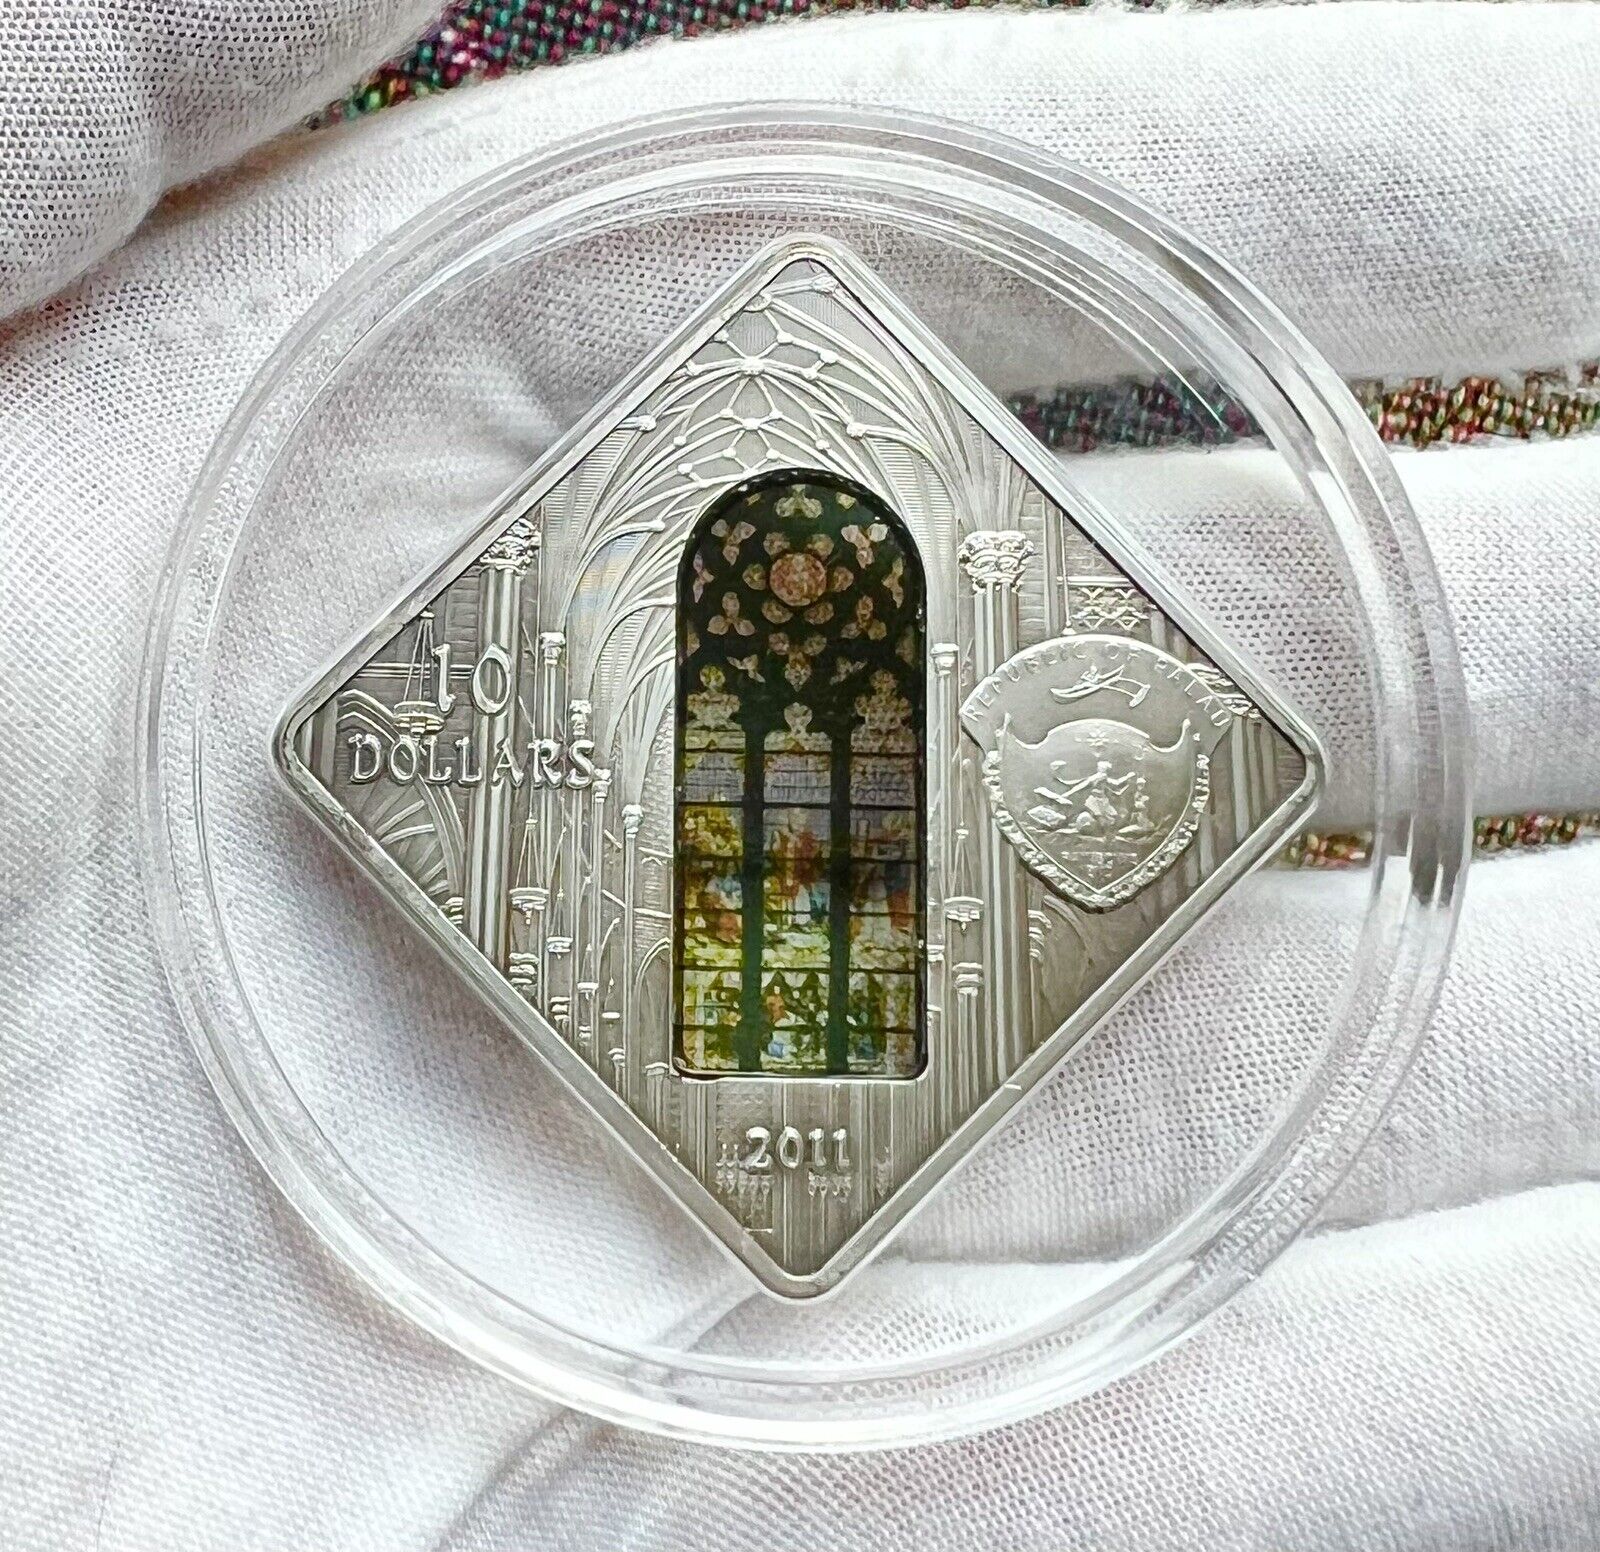 2011 Palau $10 50g Silver Coin St. Patricks Cathedral NY w/ Stained Glass Insert